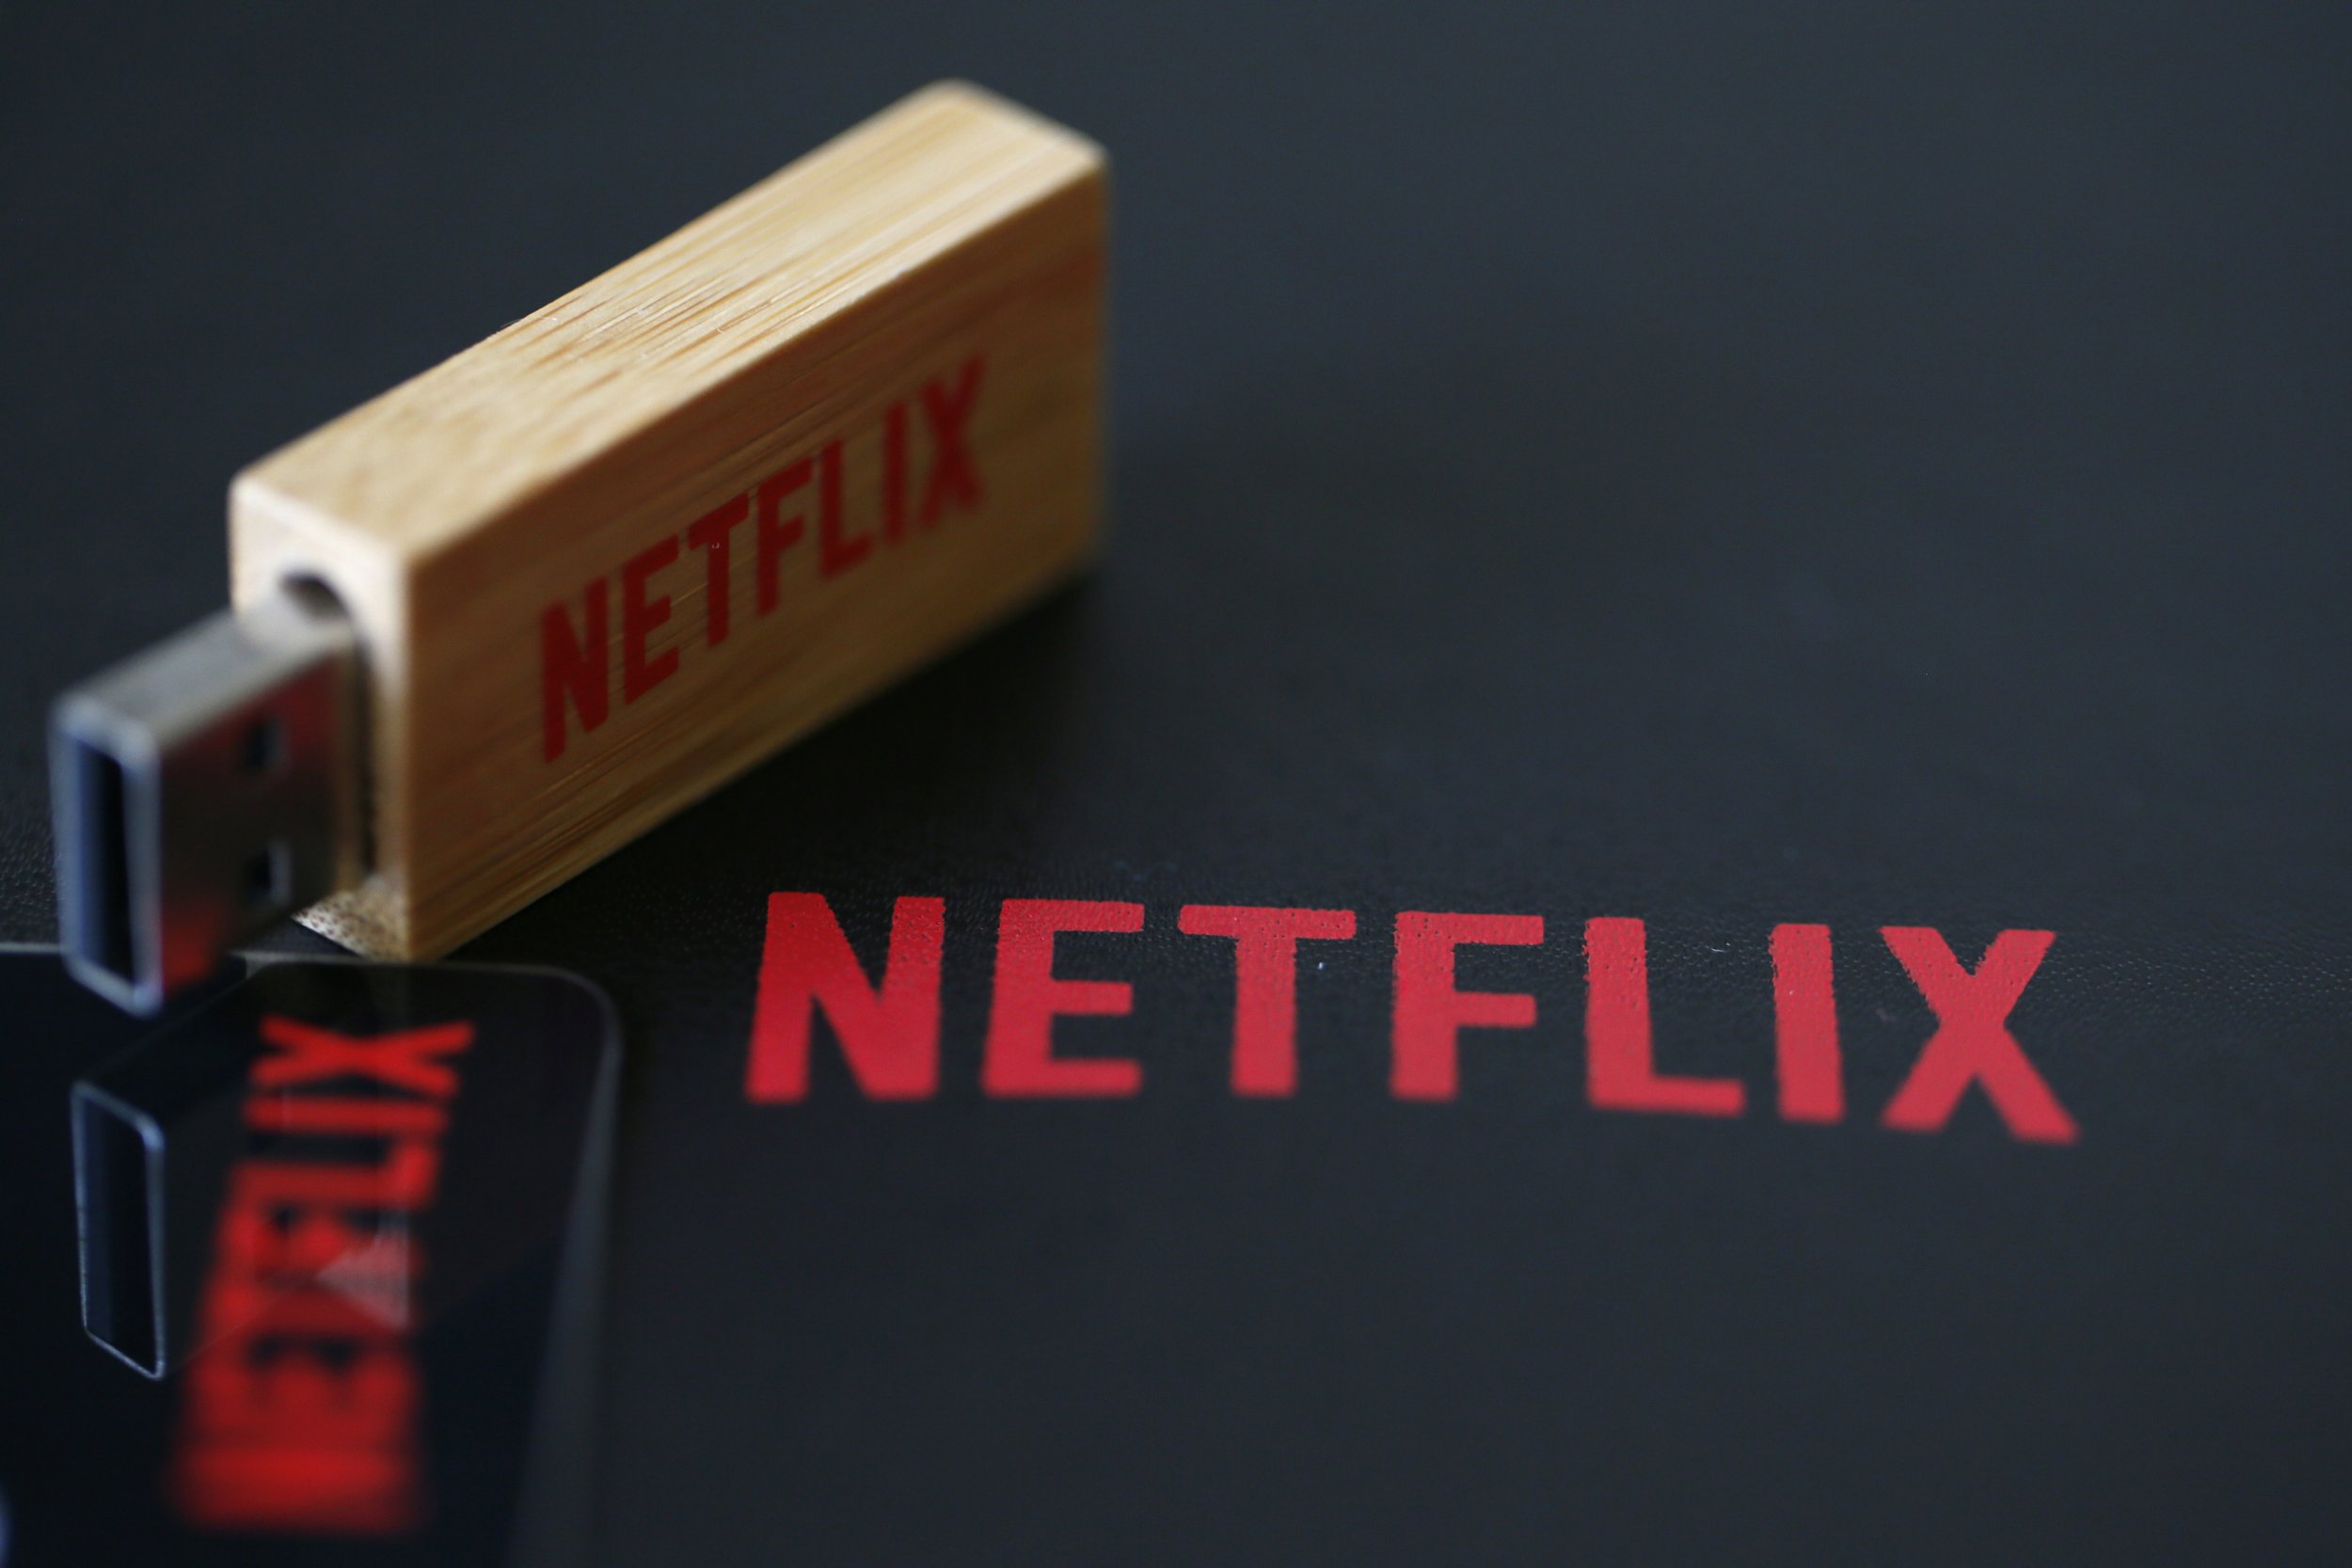 No Chill Netflix Goes Down For Many Users